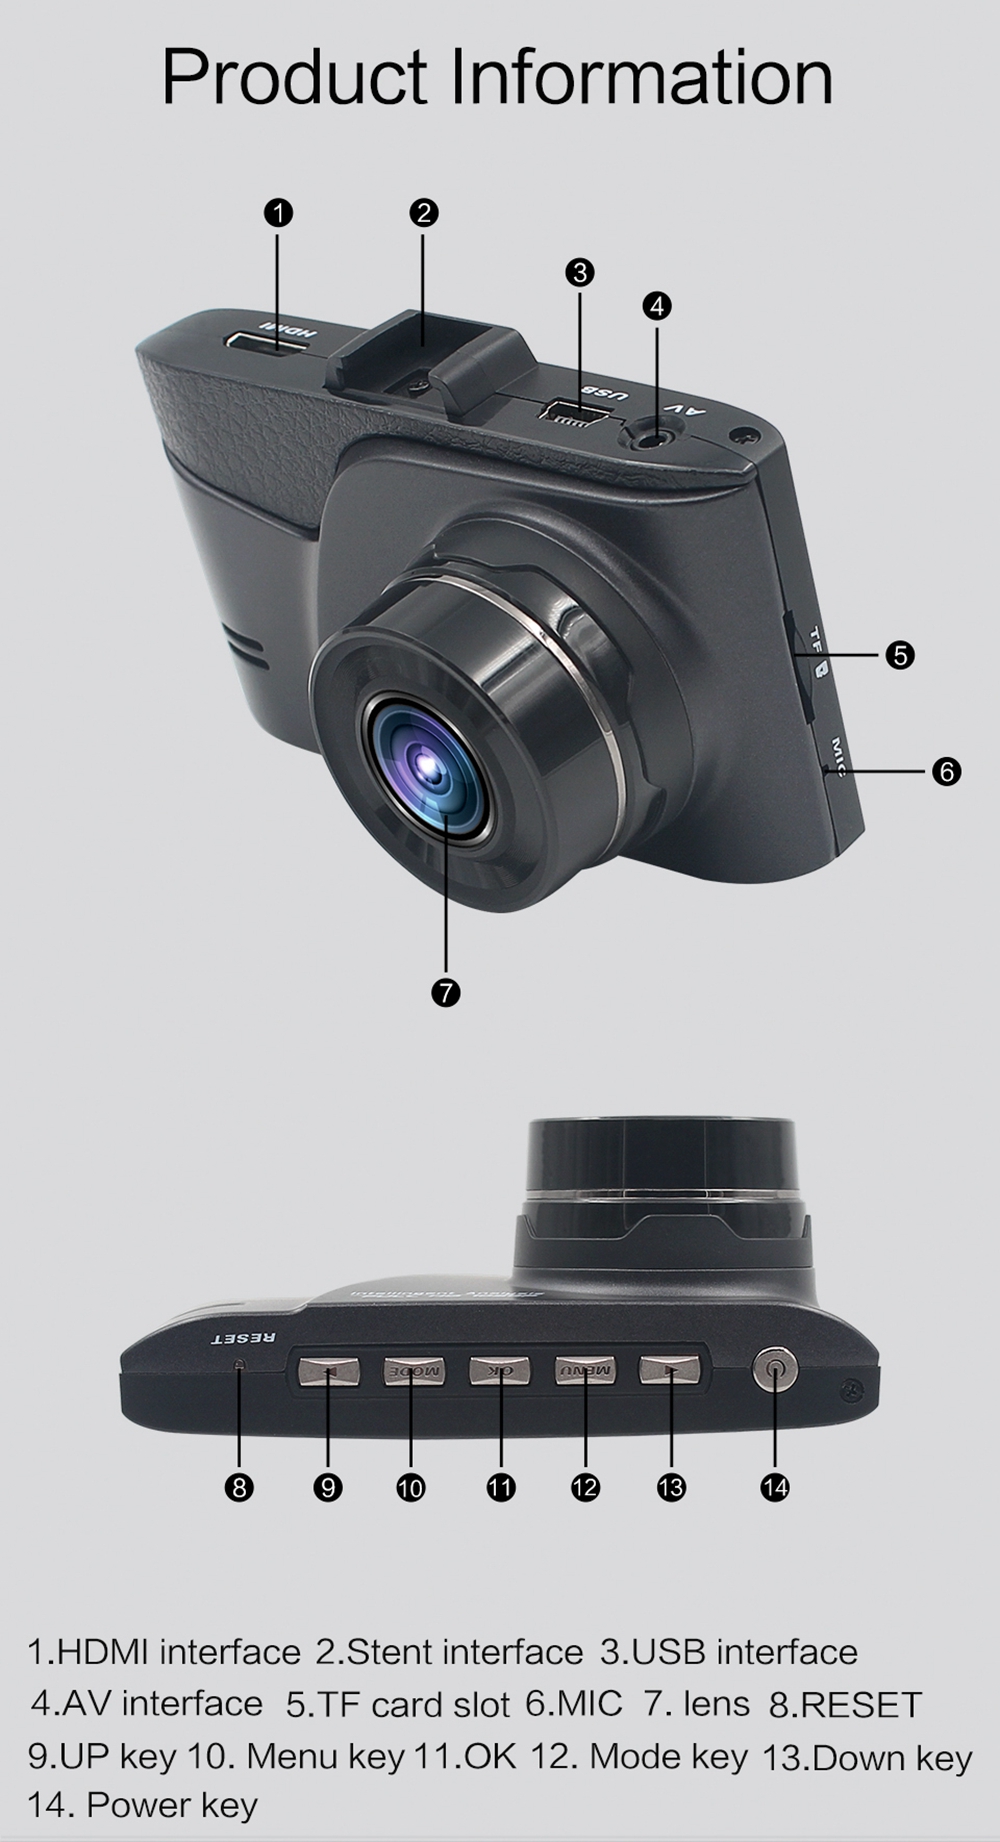 ZIQIAO JL-611 High-speed Driving Recorder 170 Degrees Gold Wide-angle Car DVR Sports DV 3-inch Screen 1080P